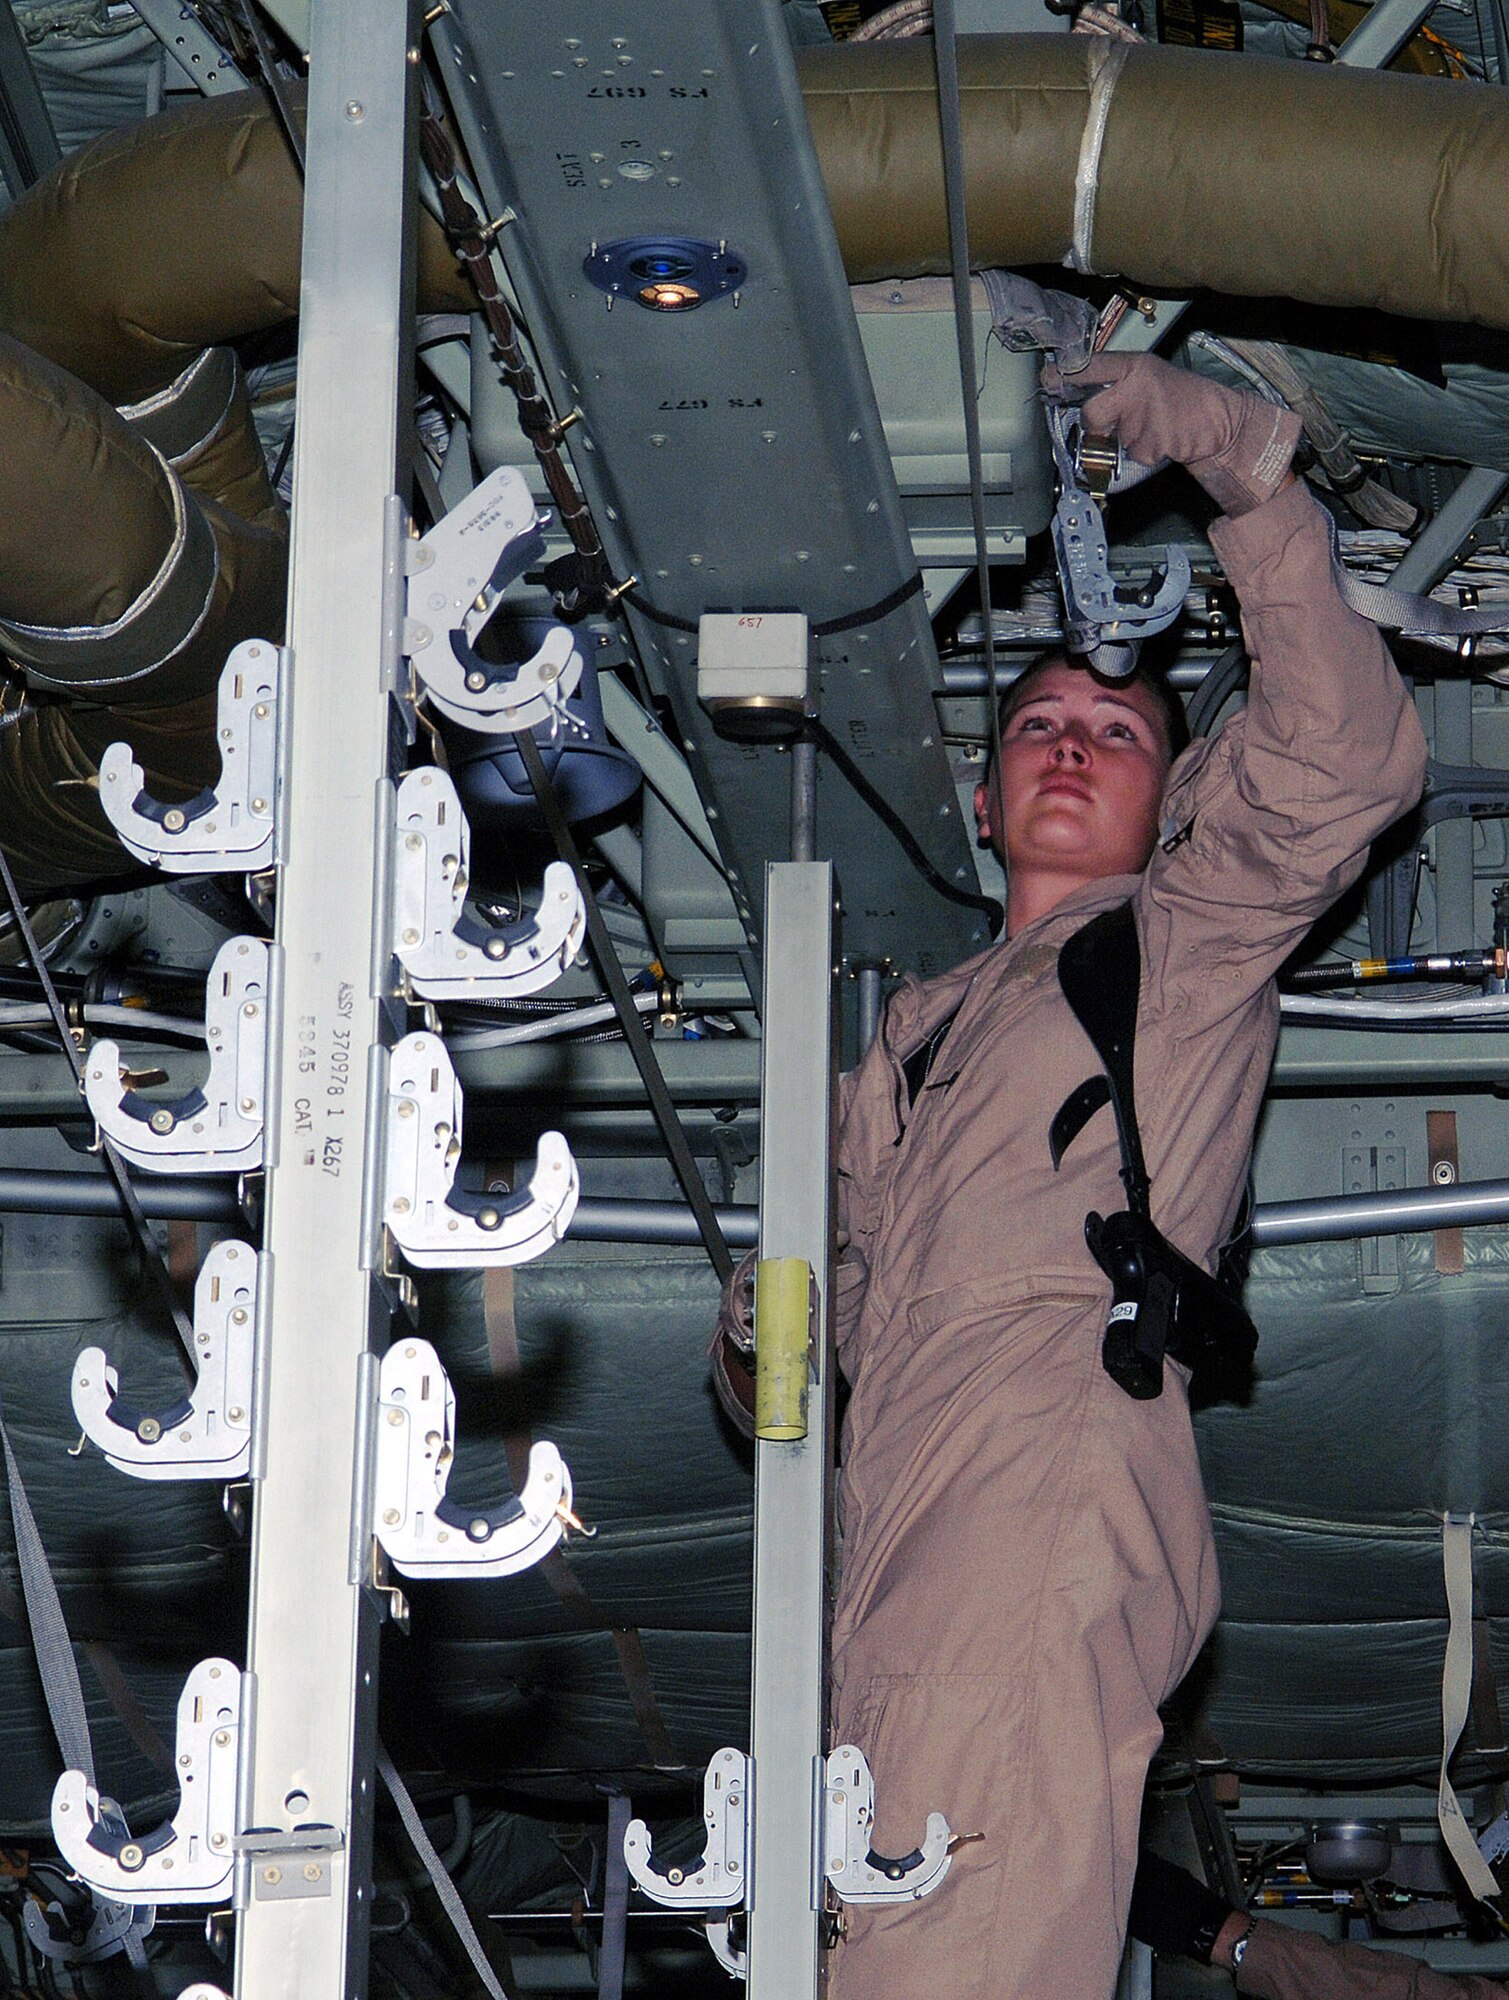 Senior Airman Amber O'Neil prepares litter straps on a C-130 Hercules at Bagram Air Base, Afghanistan, June 5 prior to bringing patients onboard for an aeromedical evacuation flight.  Airman O'Neil is a medical technician with the 455th Expeditionary Aeromedical Evacuation Flight and is deployed from the Wyoming Air National Guard's 153rd Airlift Wing.  (U.S. Air Force photo/Staff Sgt. Craig Seals)